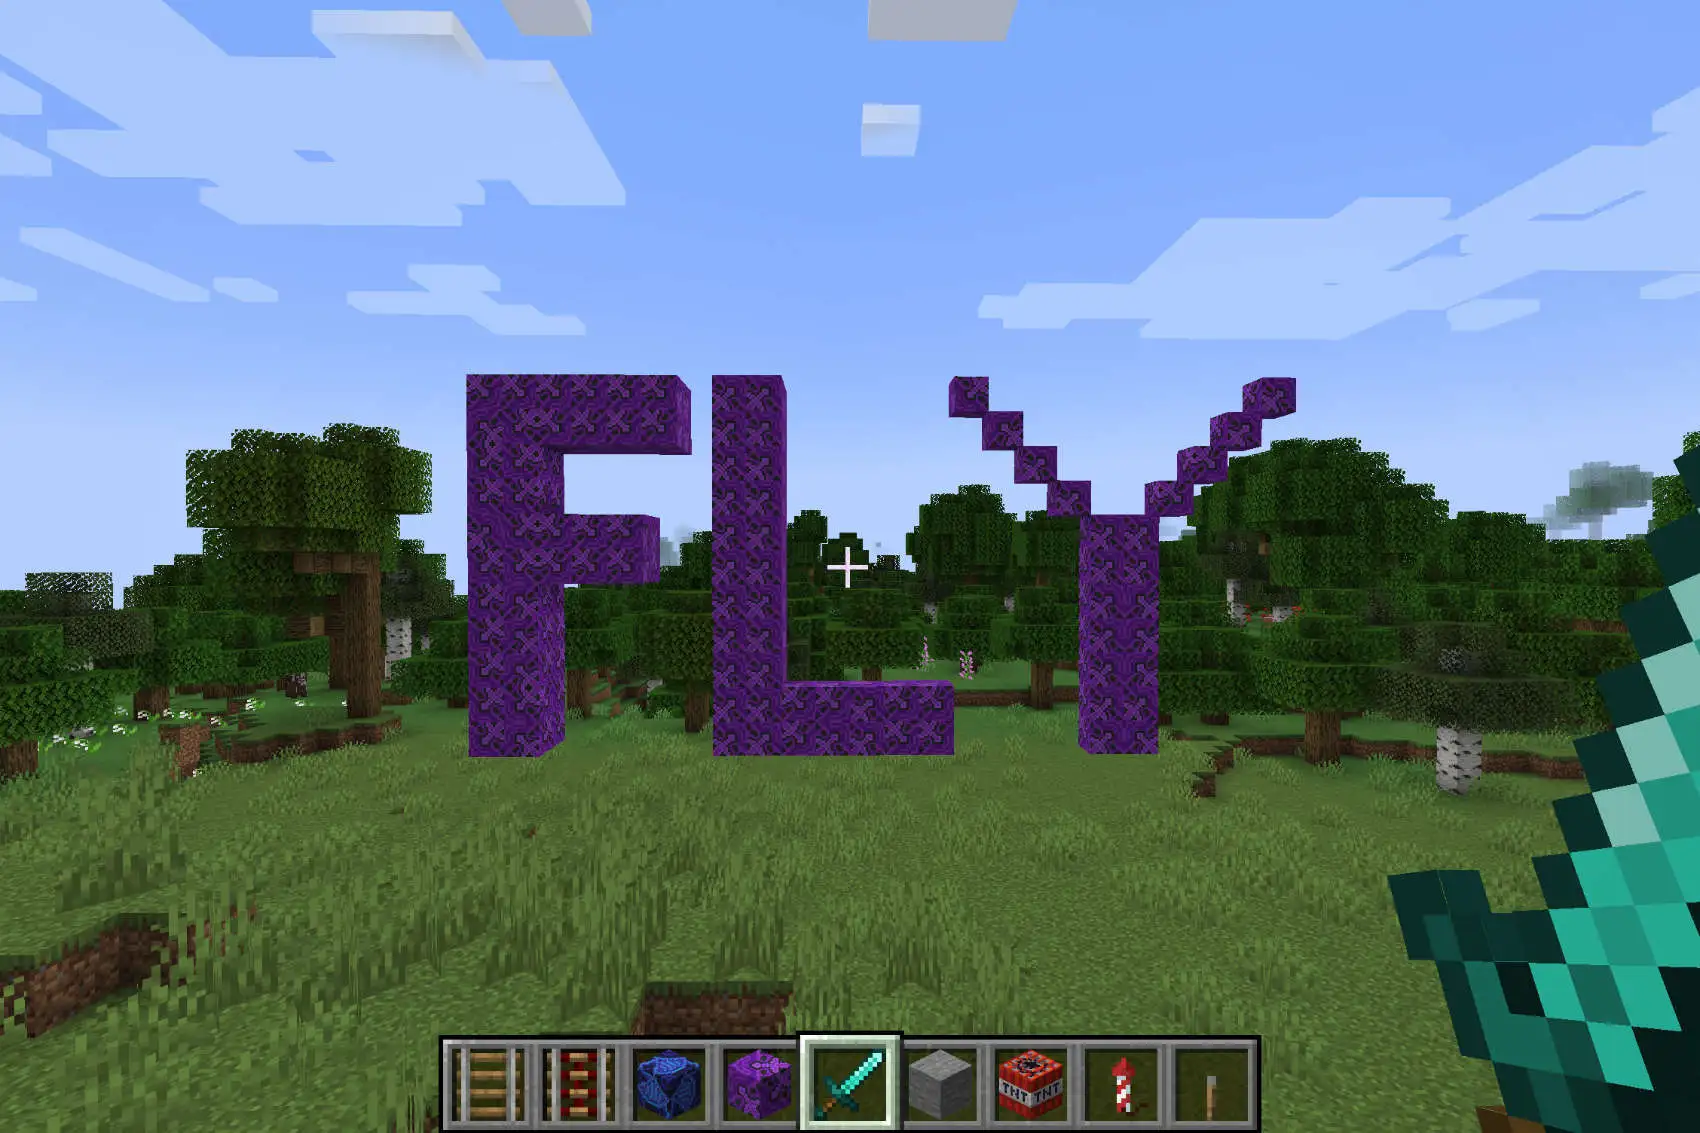 A rudimentary version of the Fly.io logo built in Minecraft